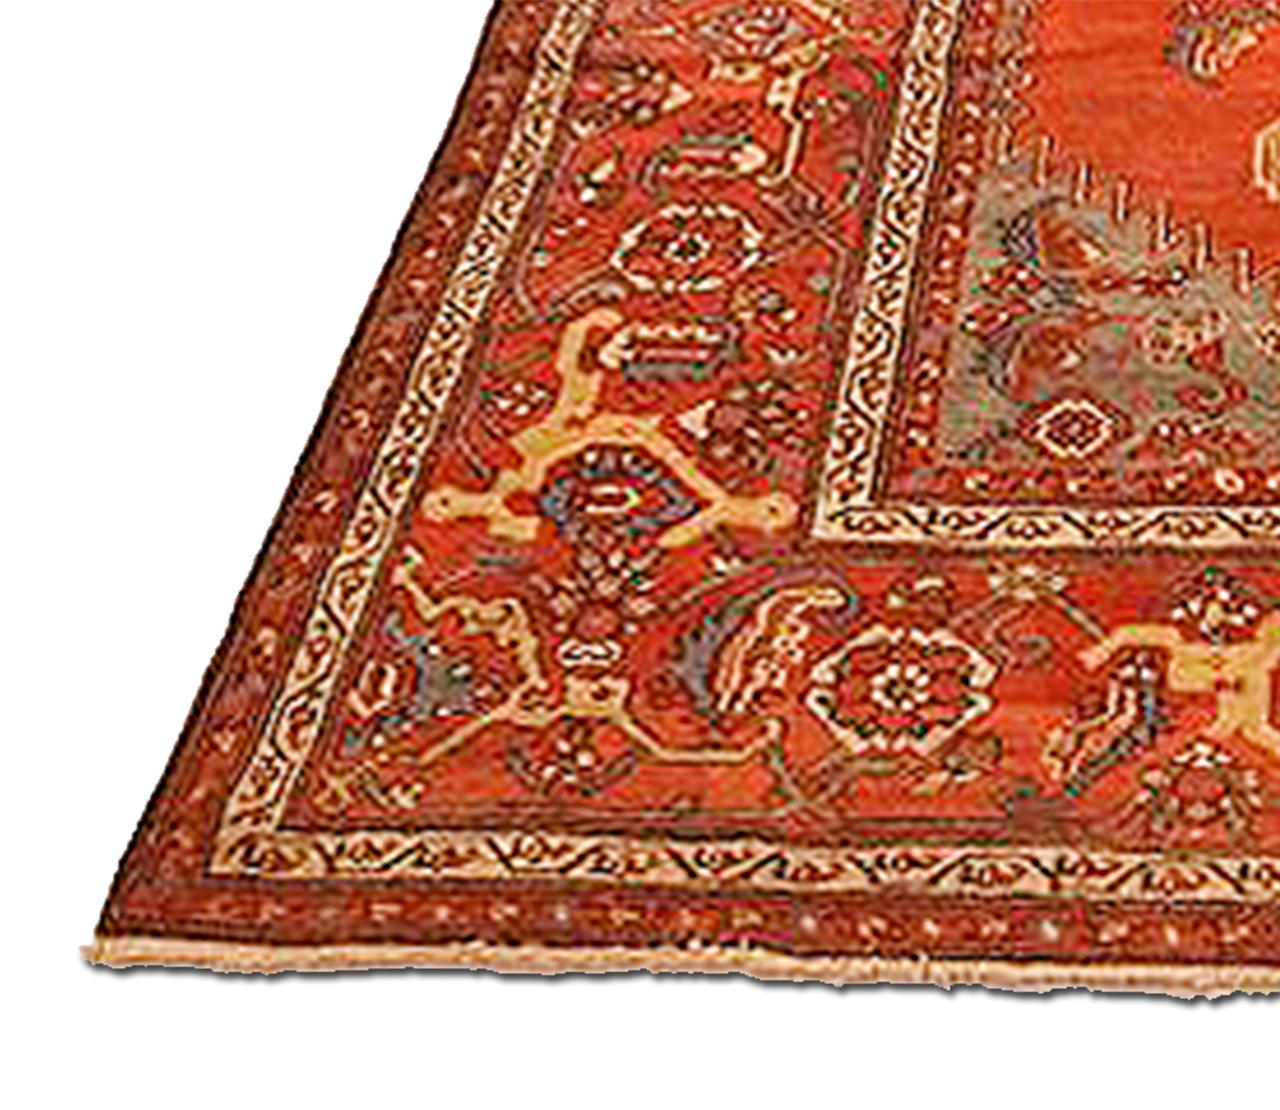 Islamic 1900s Antique Azerbaijan Rug with Ivory Central Medallion over Red Field For Sale